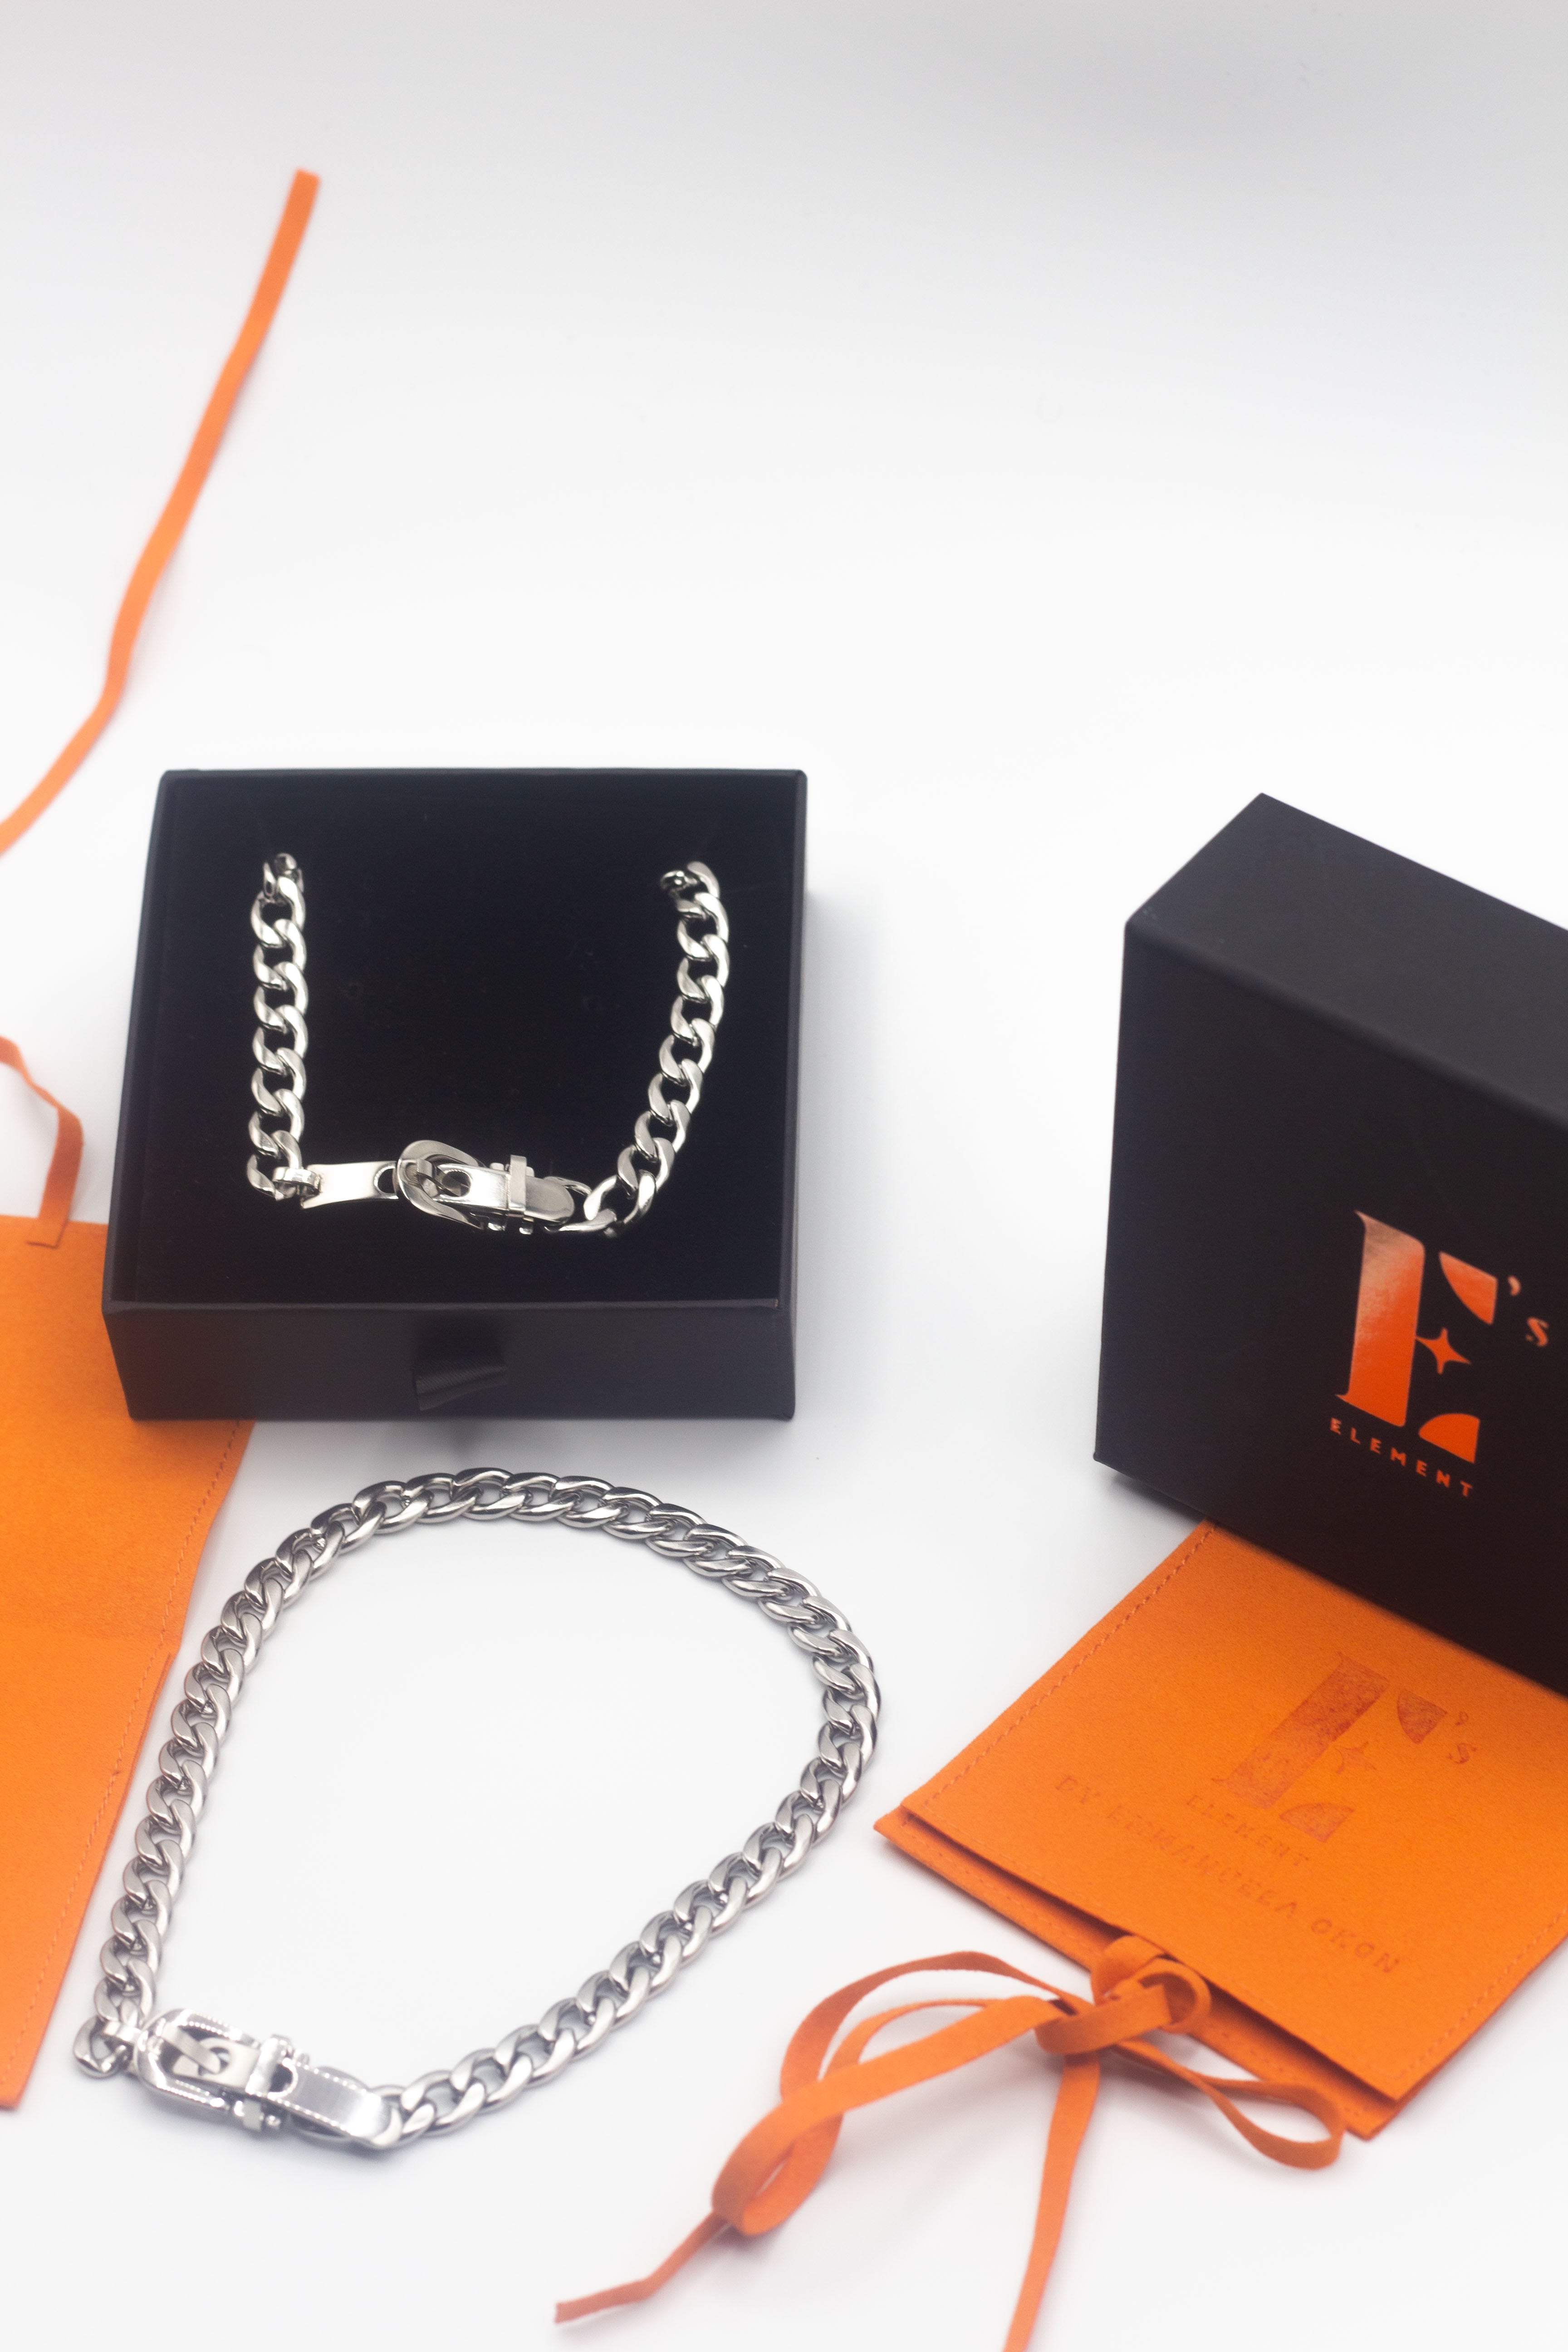 18k silver stainless steel buckle choker resting in its container. There is an orange leather packaging on the right and a lid with the E's Element logo imprinted. There is another silver buckle choker placed under the container with the choker. Ella Buckle Choker by E's Element.